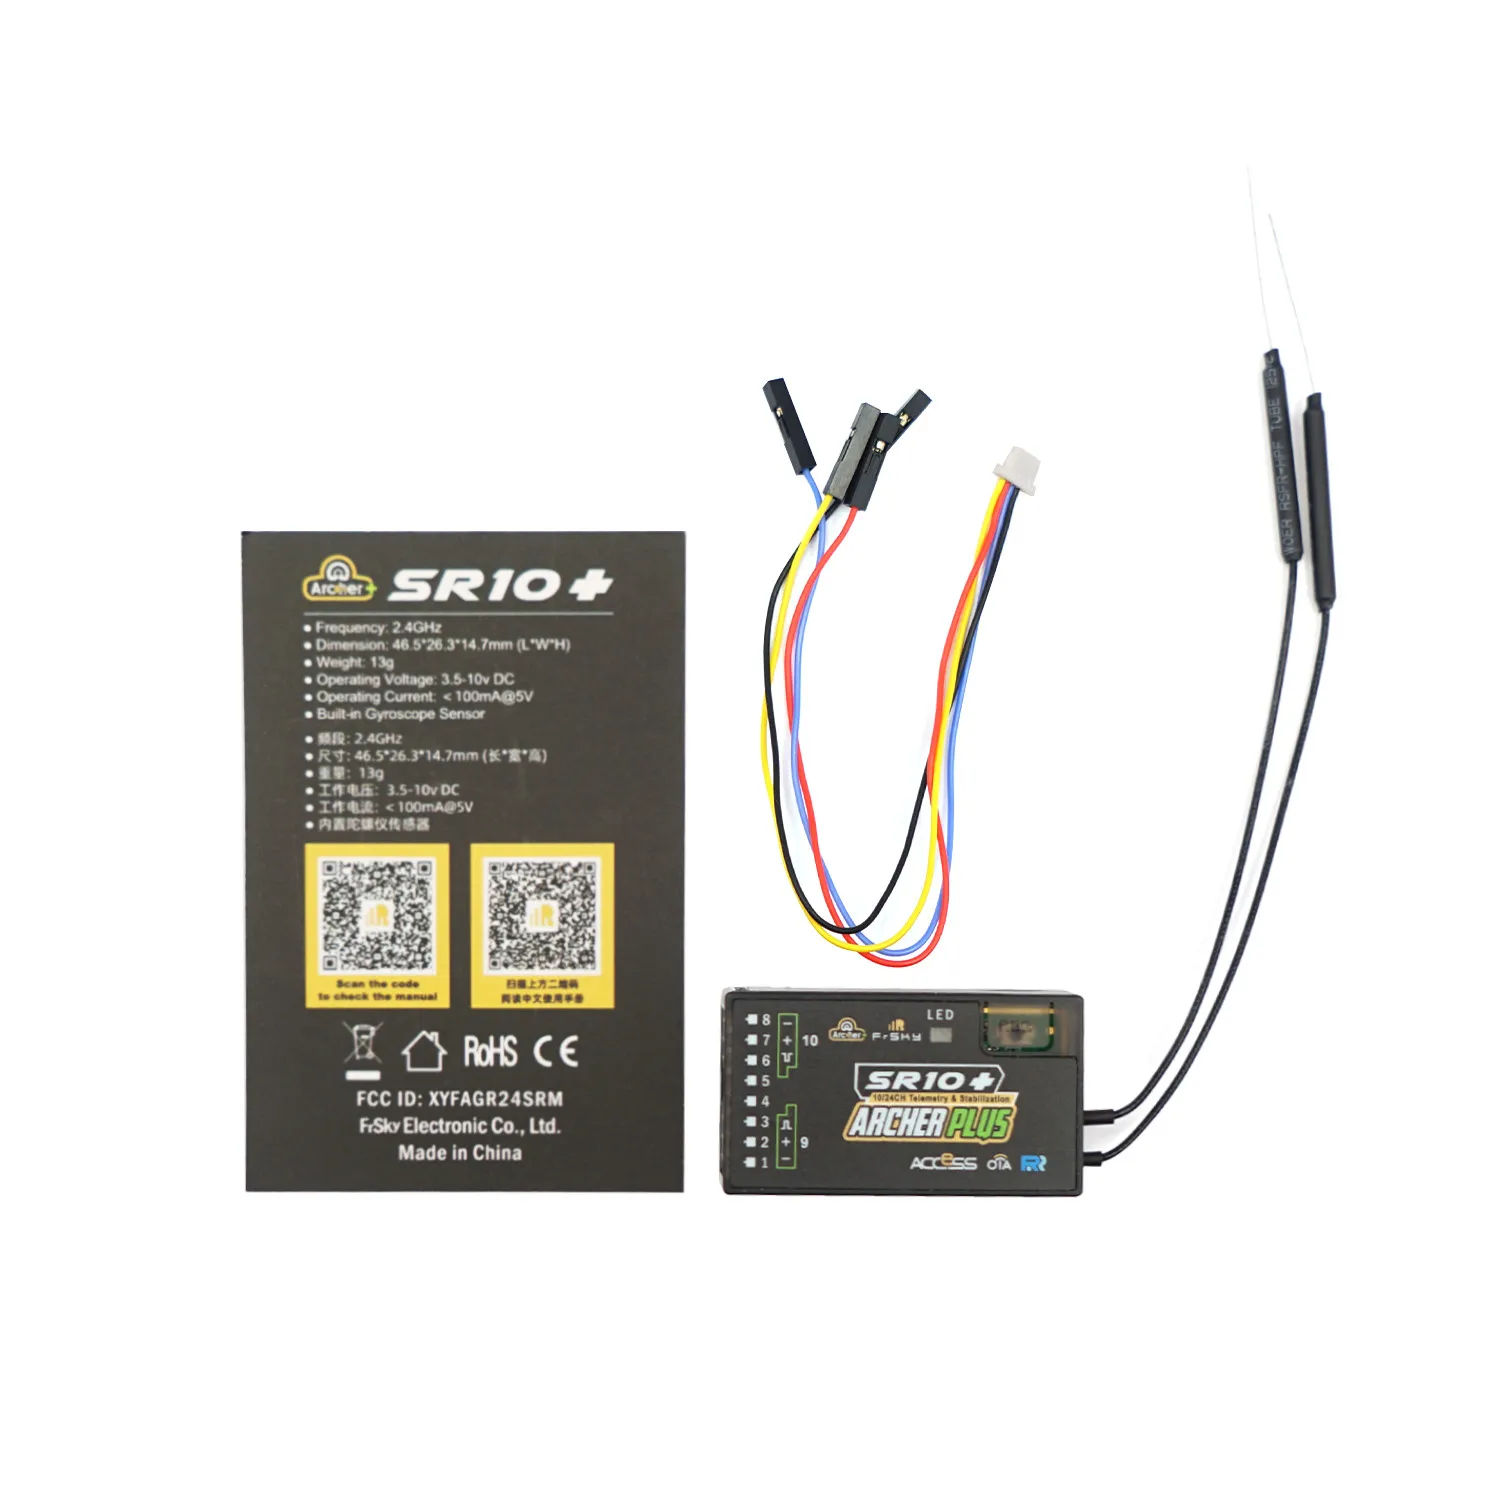 

FrSky 2.4GHz ACCESS ARCHER SR8 PRO / SR10 gyro-stabilized Receivers built-in 3-axis gyroscope 3-axis accelerometer